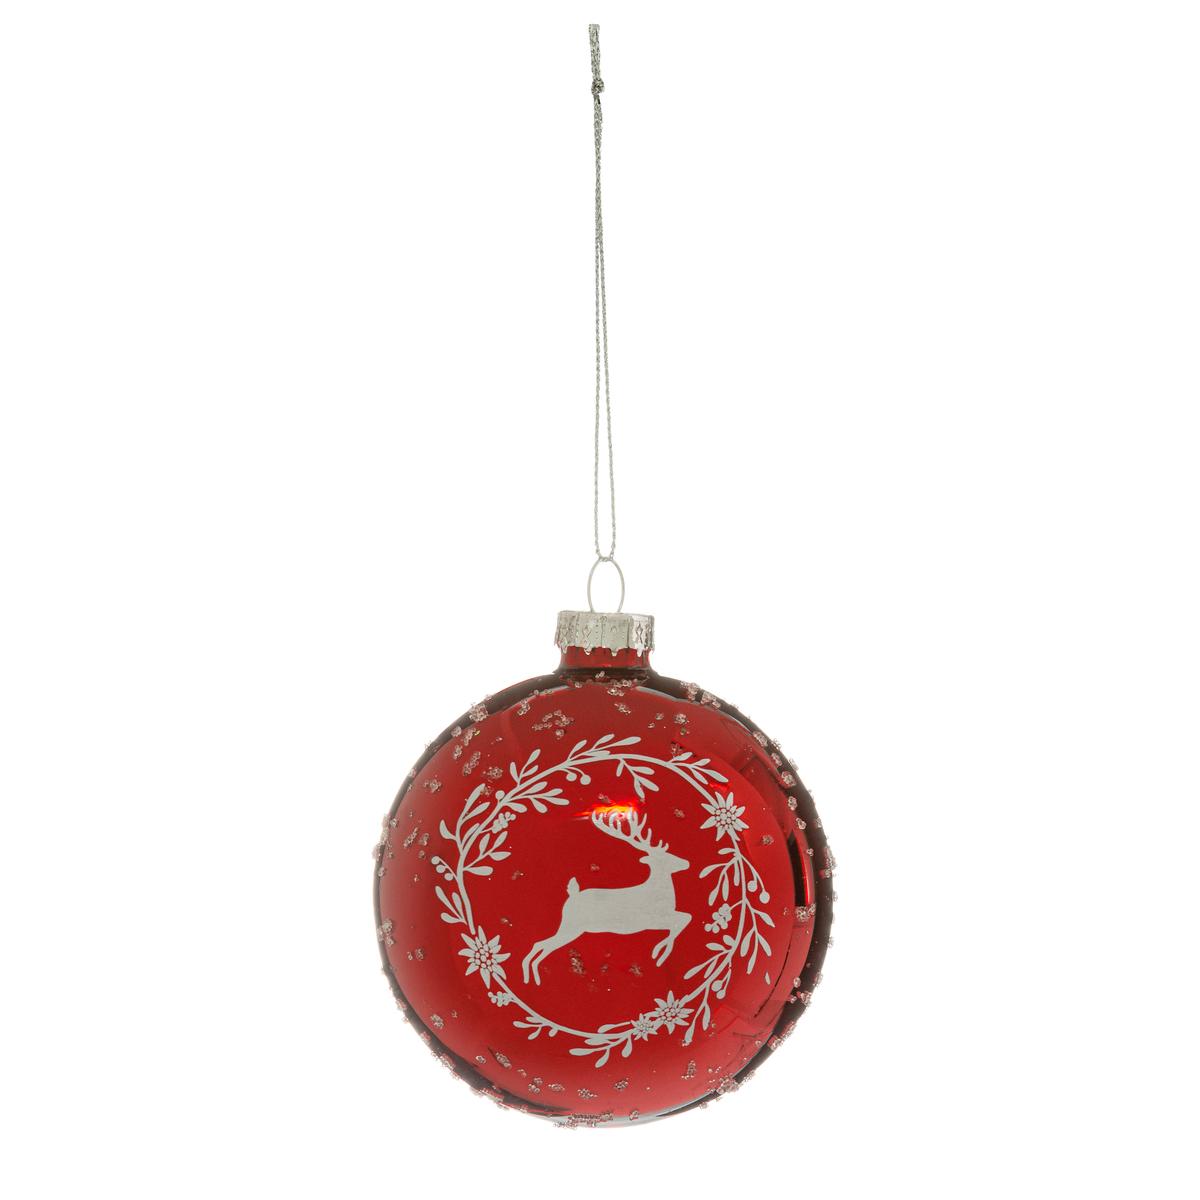 Lee Display's Plastic Glitter Red Ball Ornaments Holiday Decorations 140mm